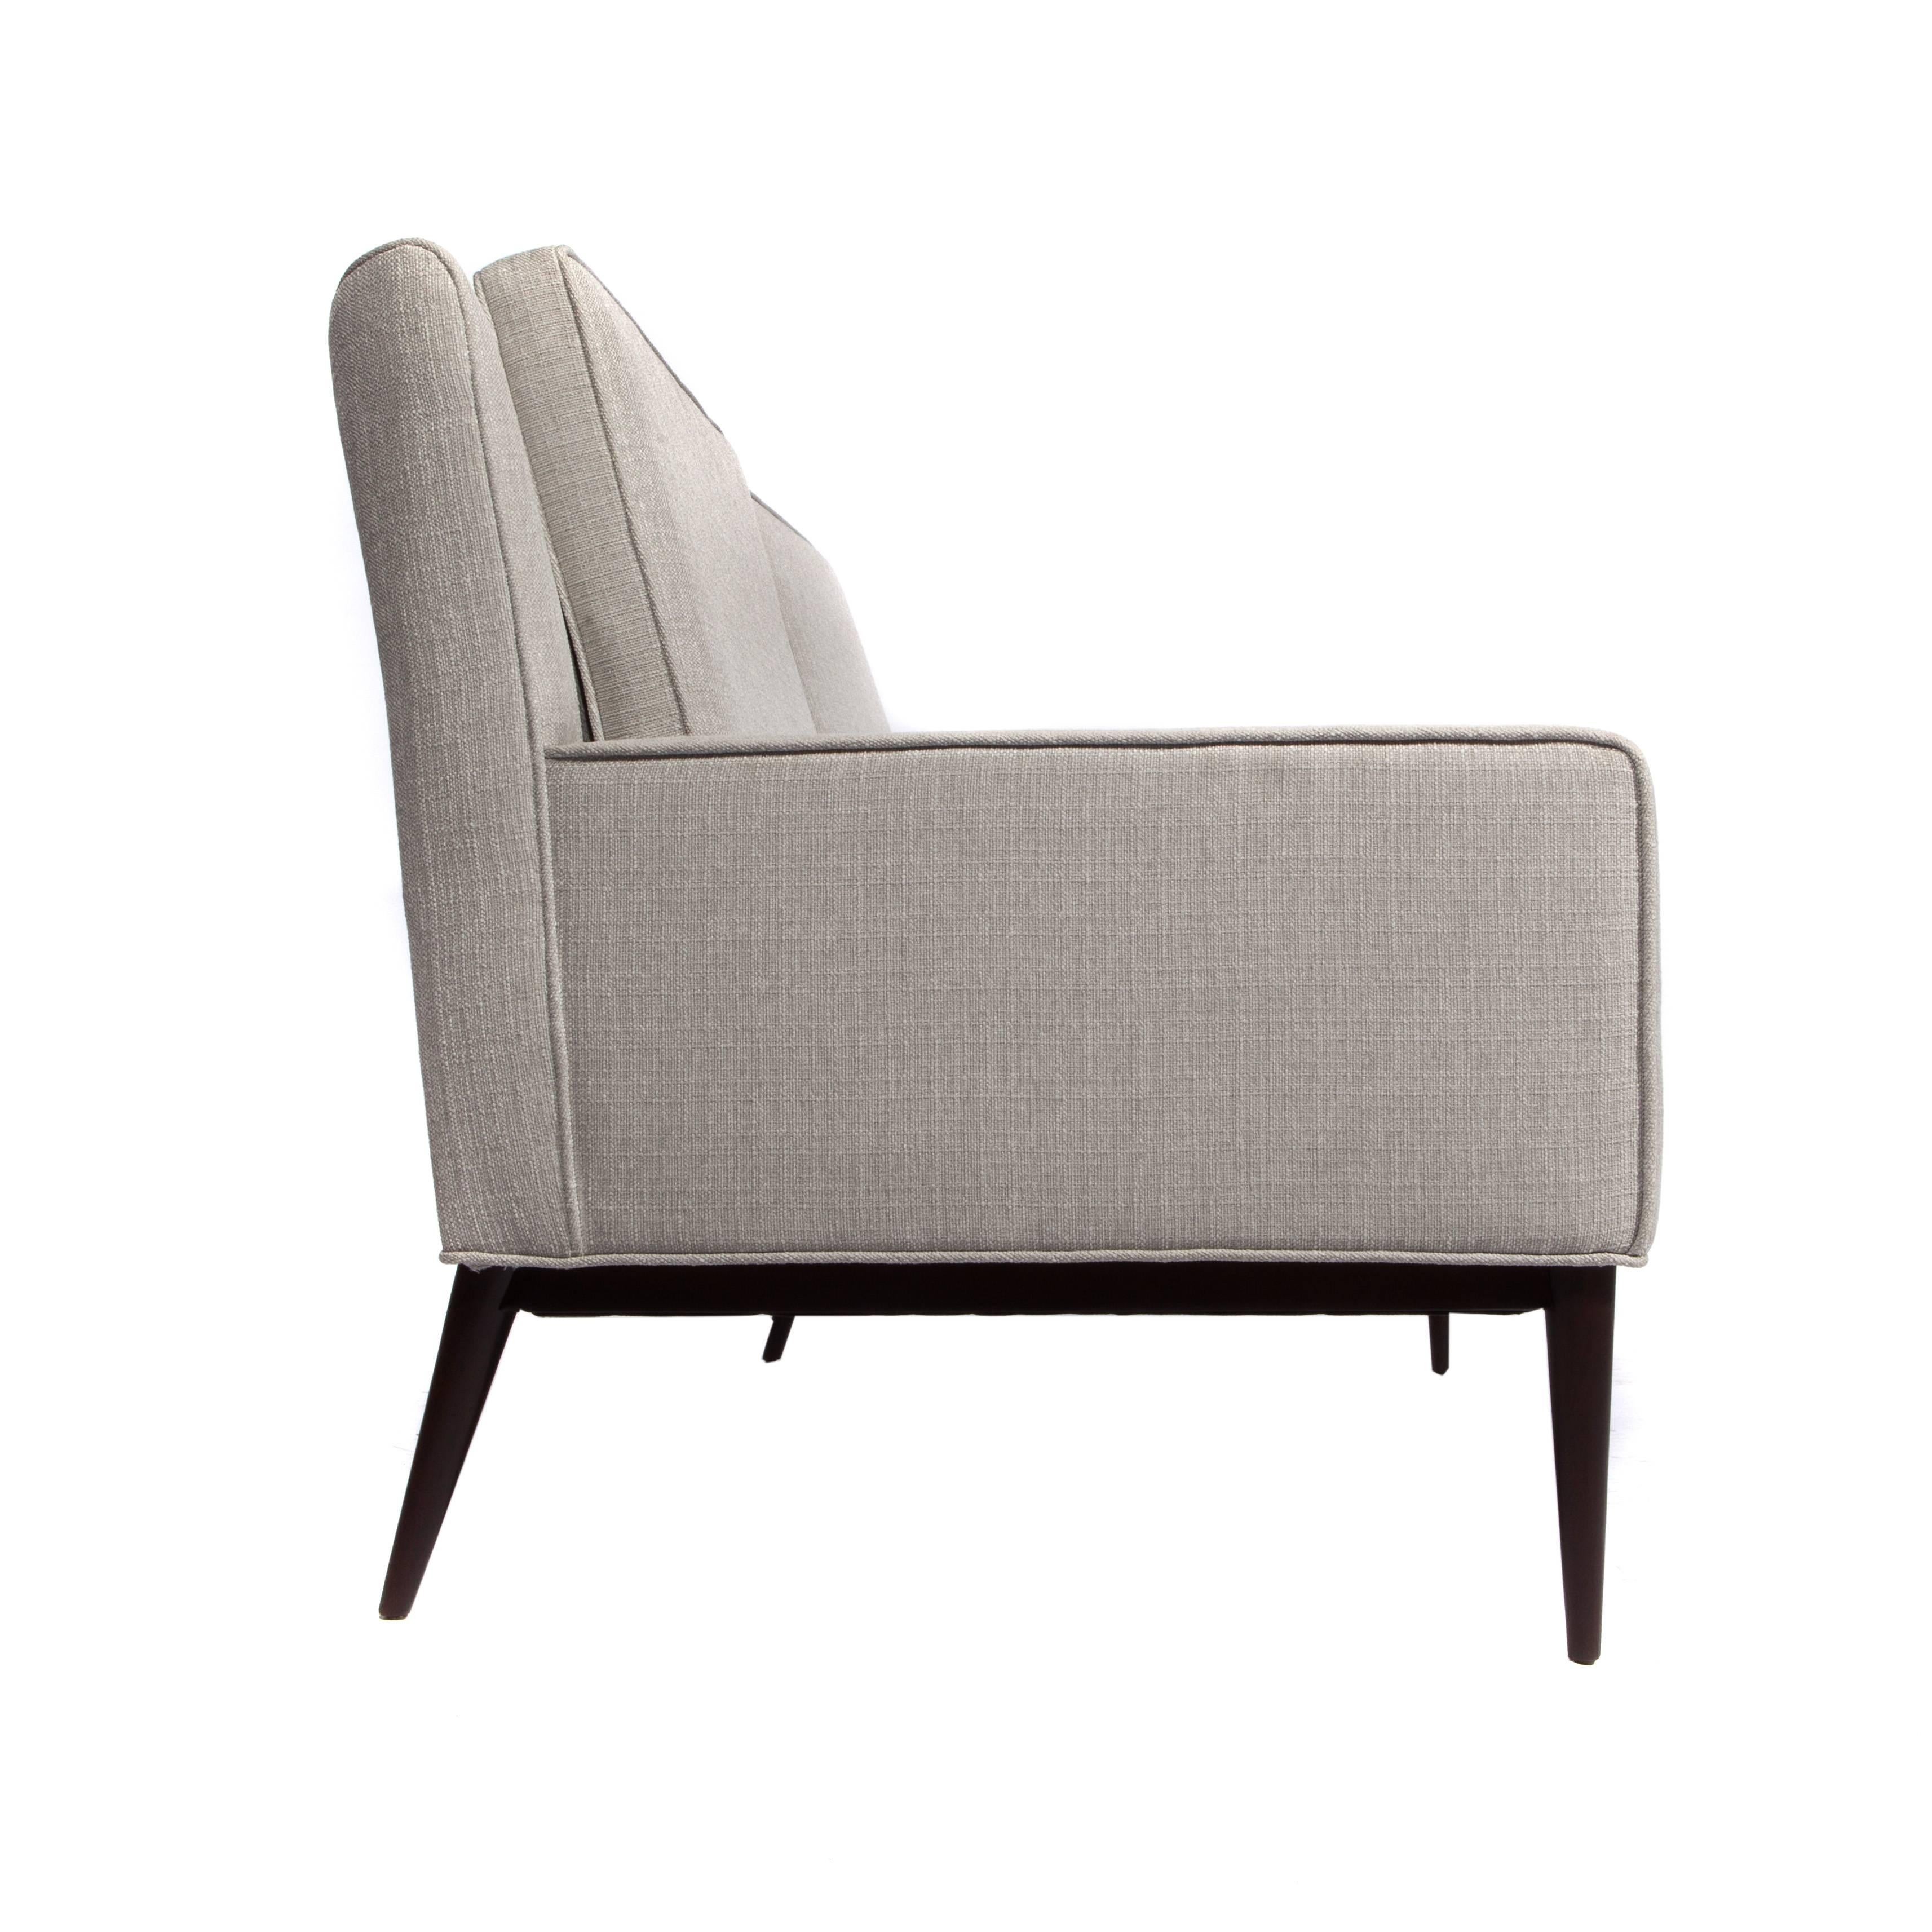 Chic, curved-back 1950s Paul McCobb loveseat floating on tapered and angled walnut legs. Newly restored and reupholstered in a light silver-gray woven fabric. Fabric swatch available. 




